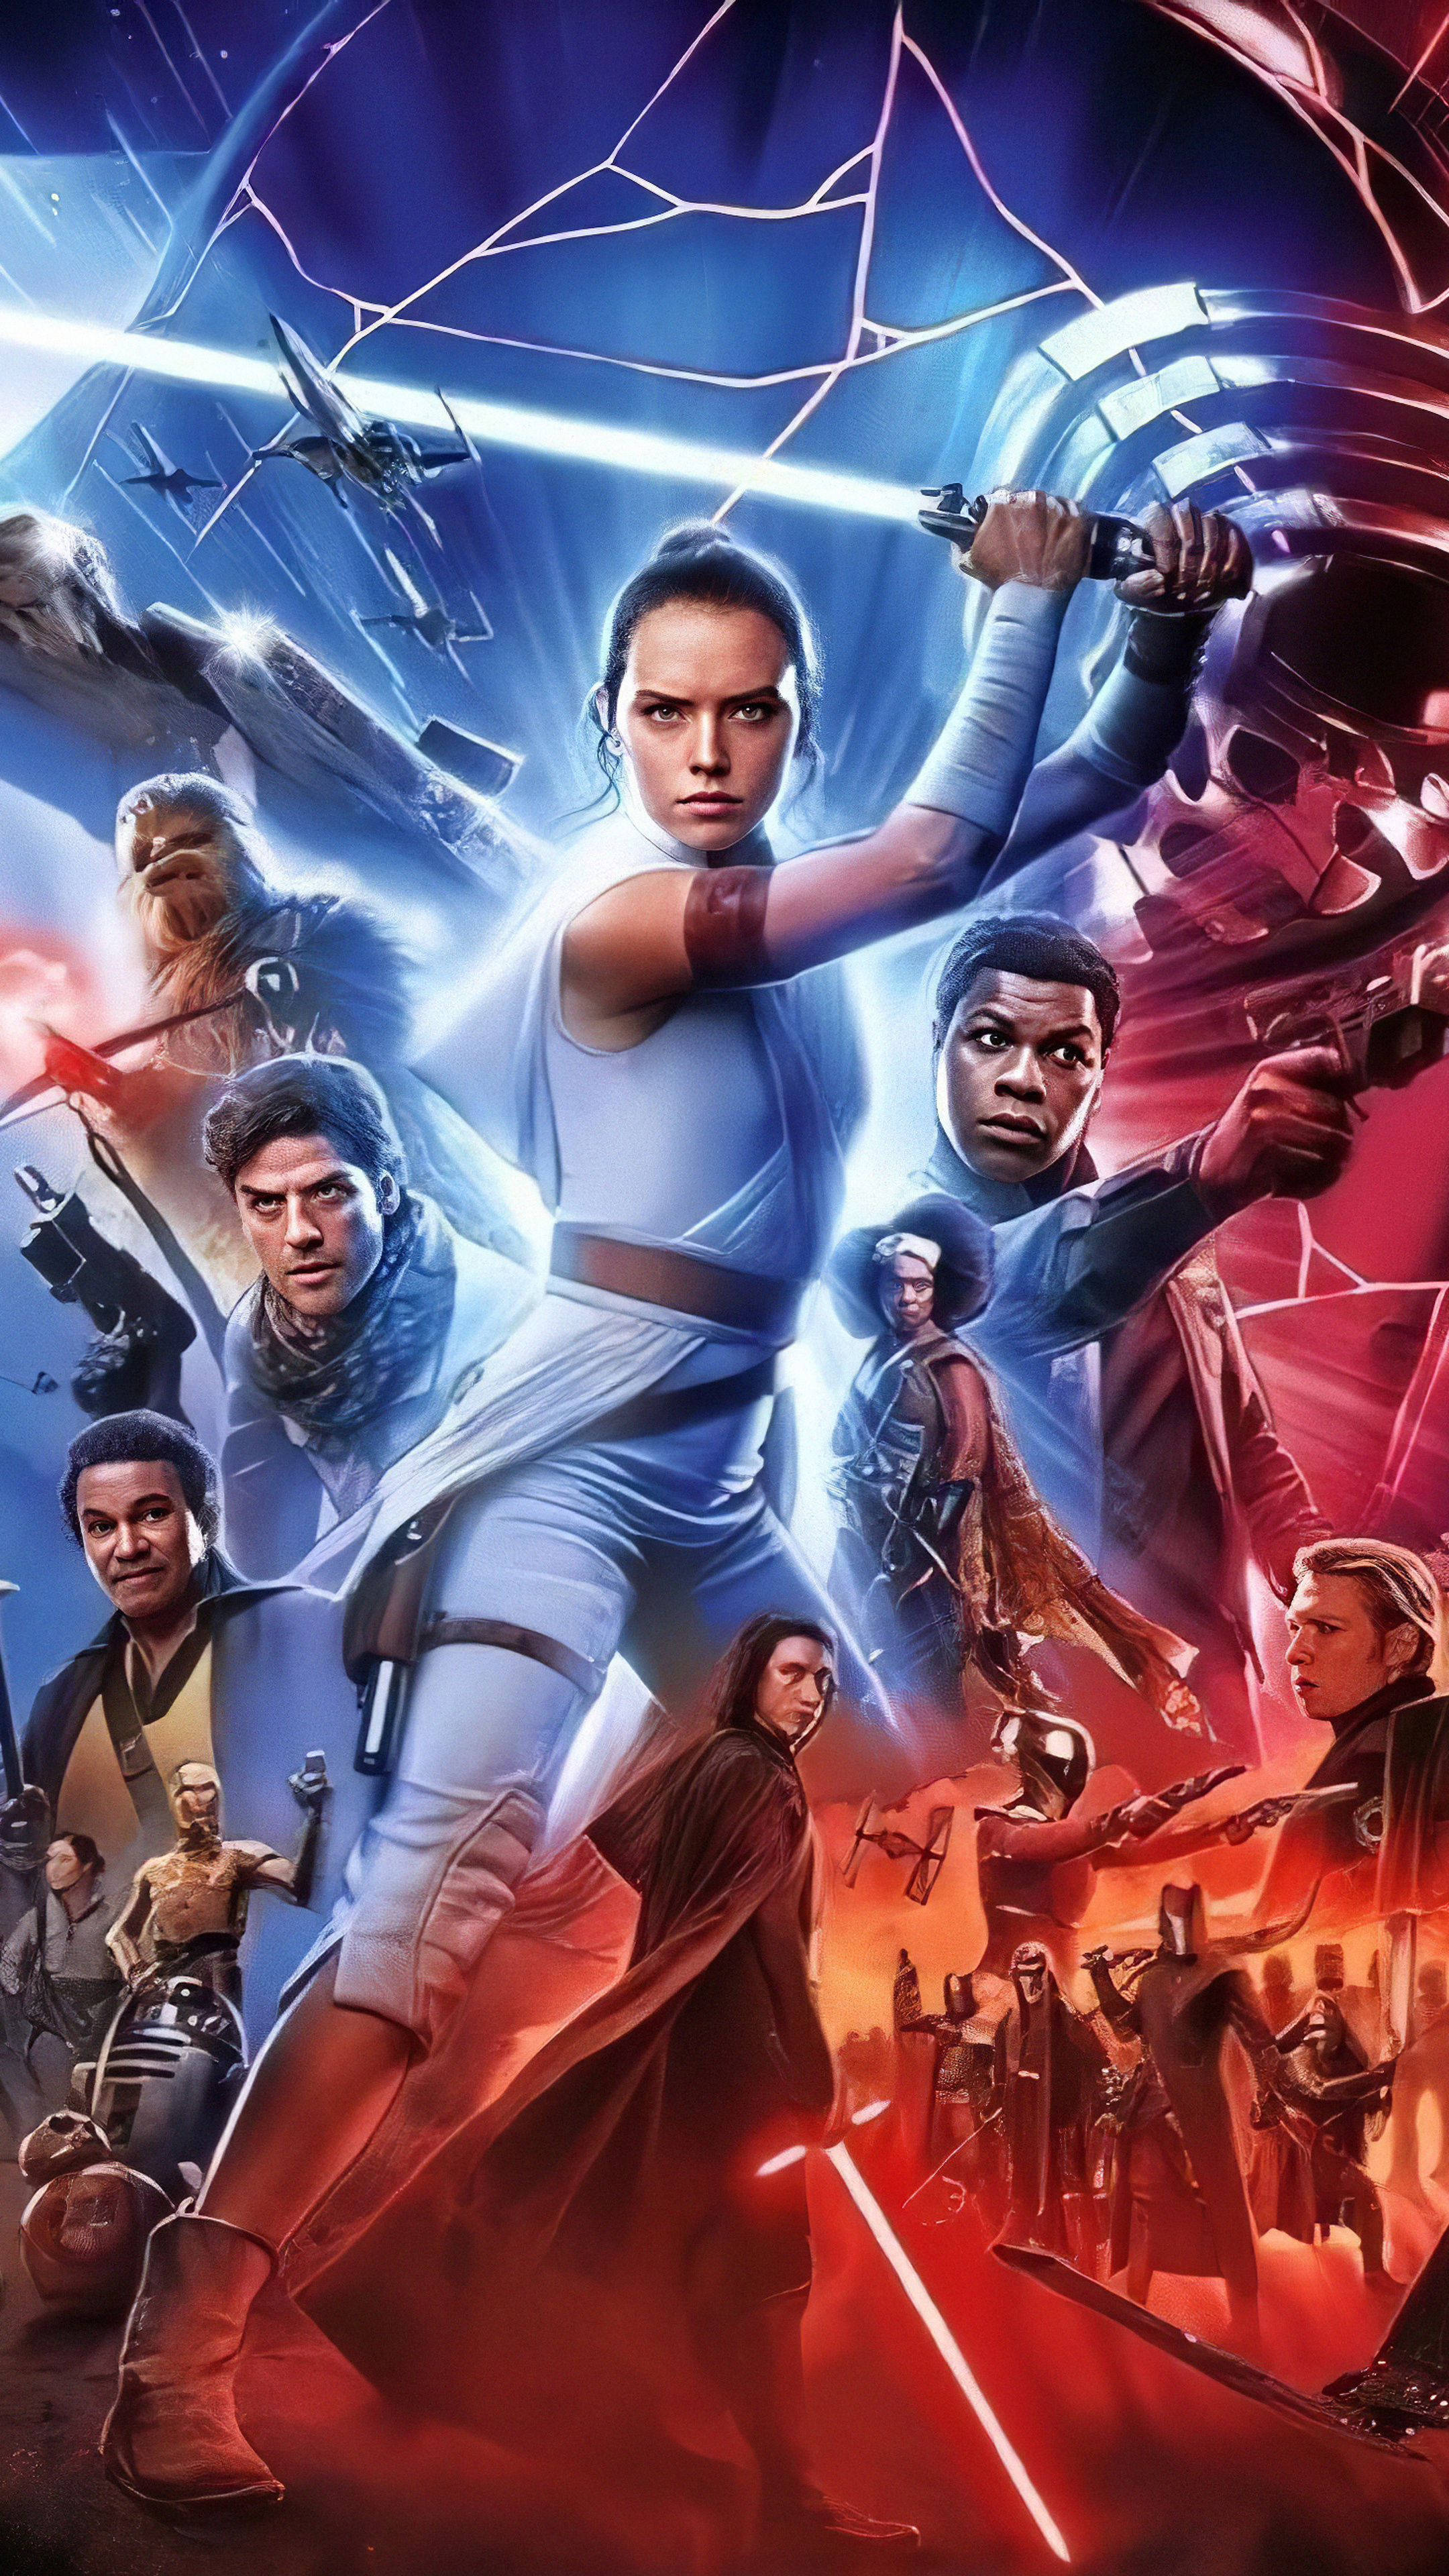 Star Wars Rise of Skywalker, IMAX poster, Sony Xperia, HD wallpapers, 2160x3840 4K Handy